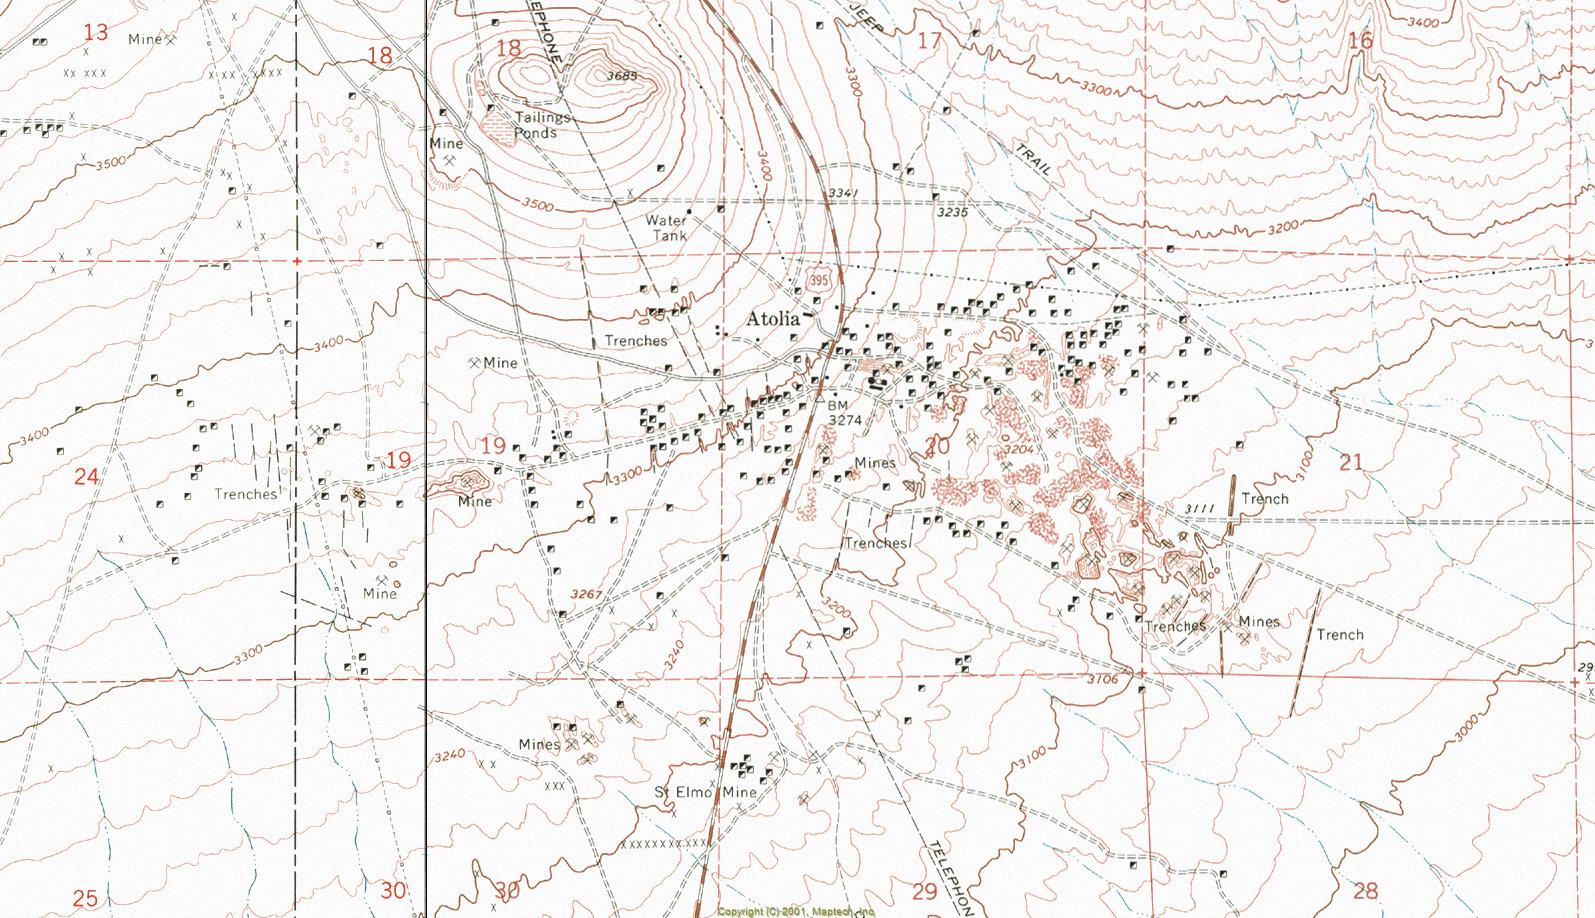 USGS Topographical map